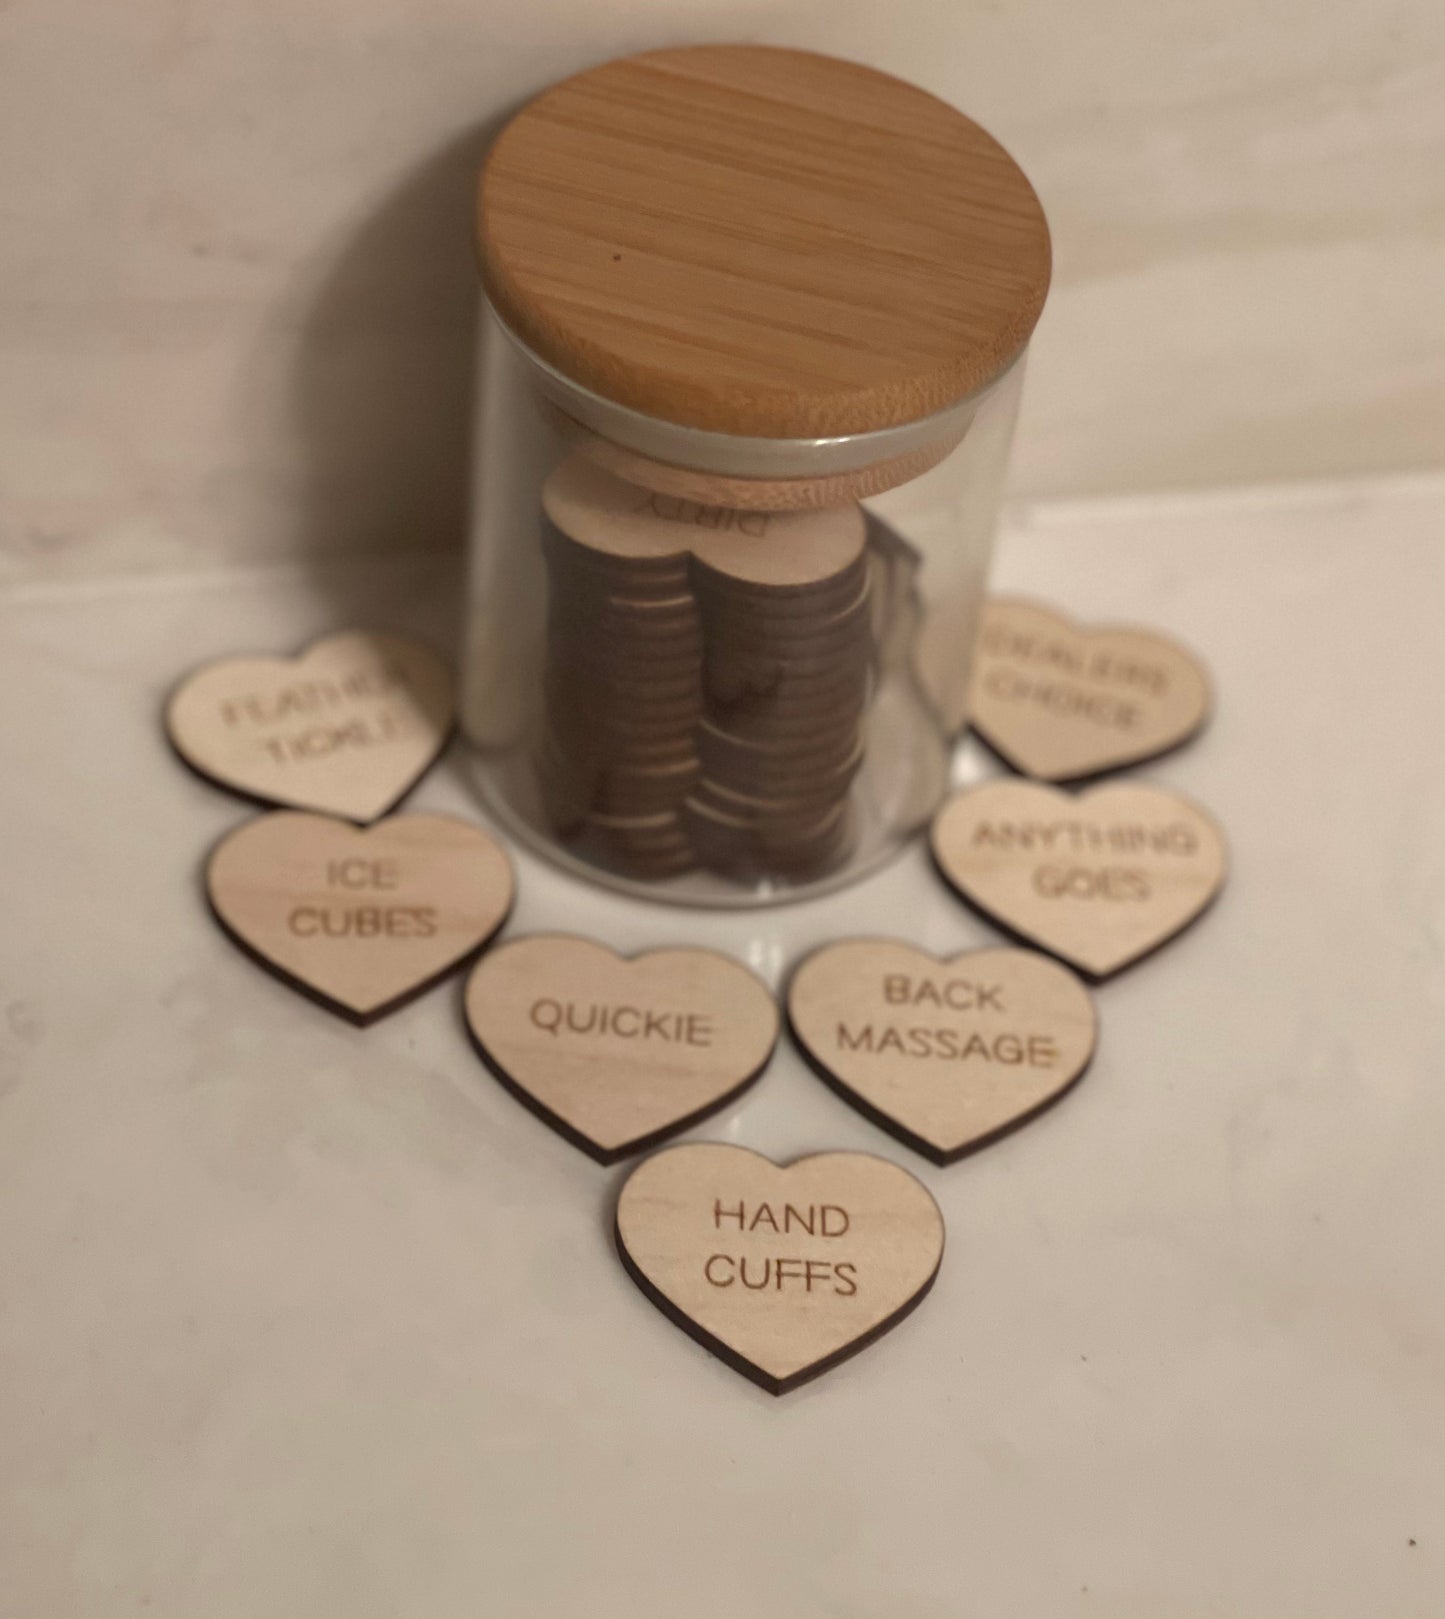 Naughty Date Night Tokens (30 count)